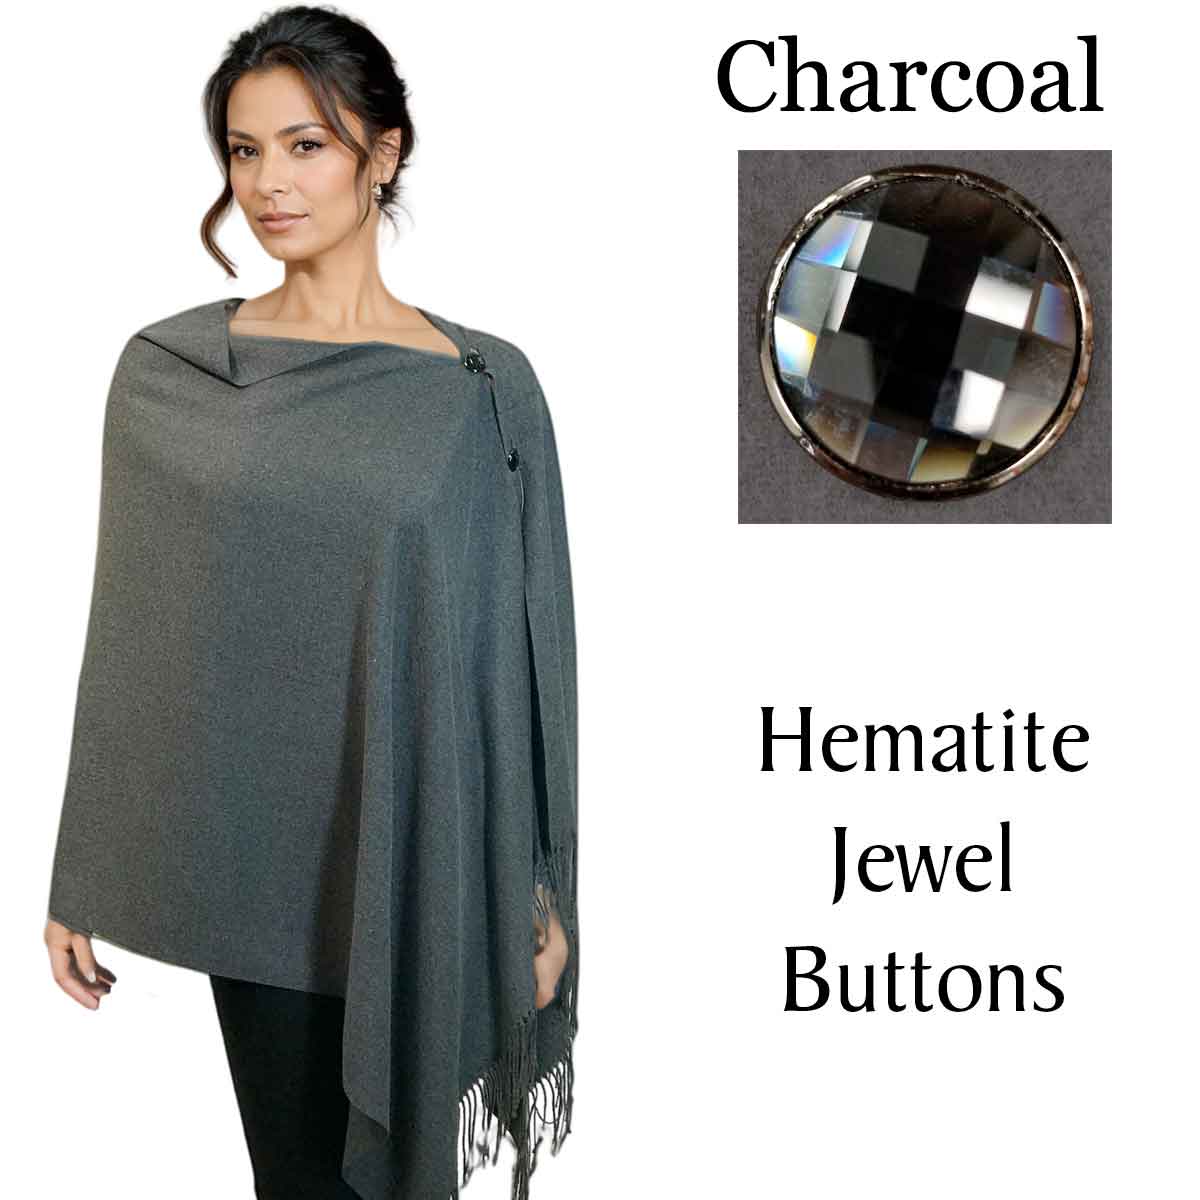 #05 Charcoal with Hematite Jewel Buttons